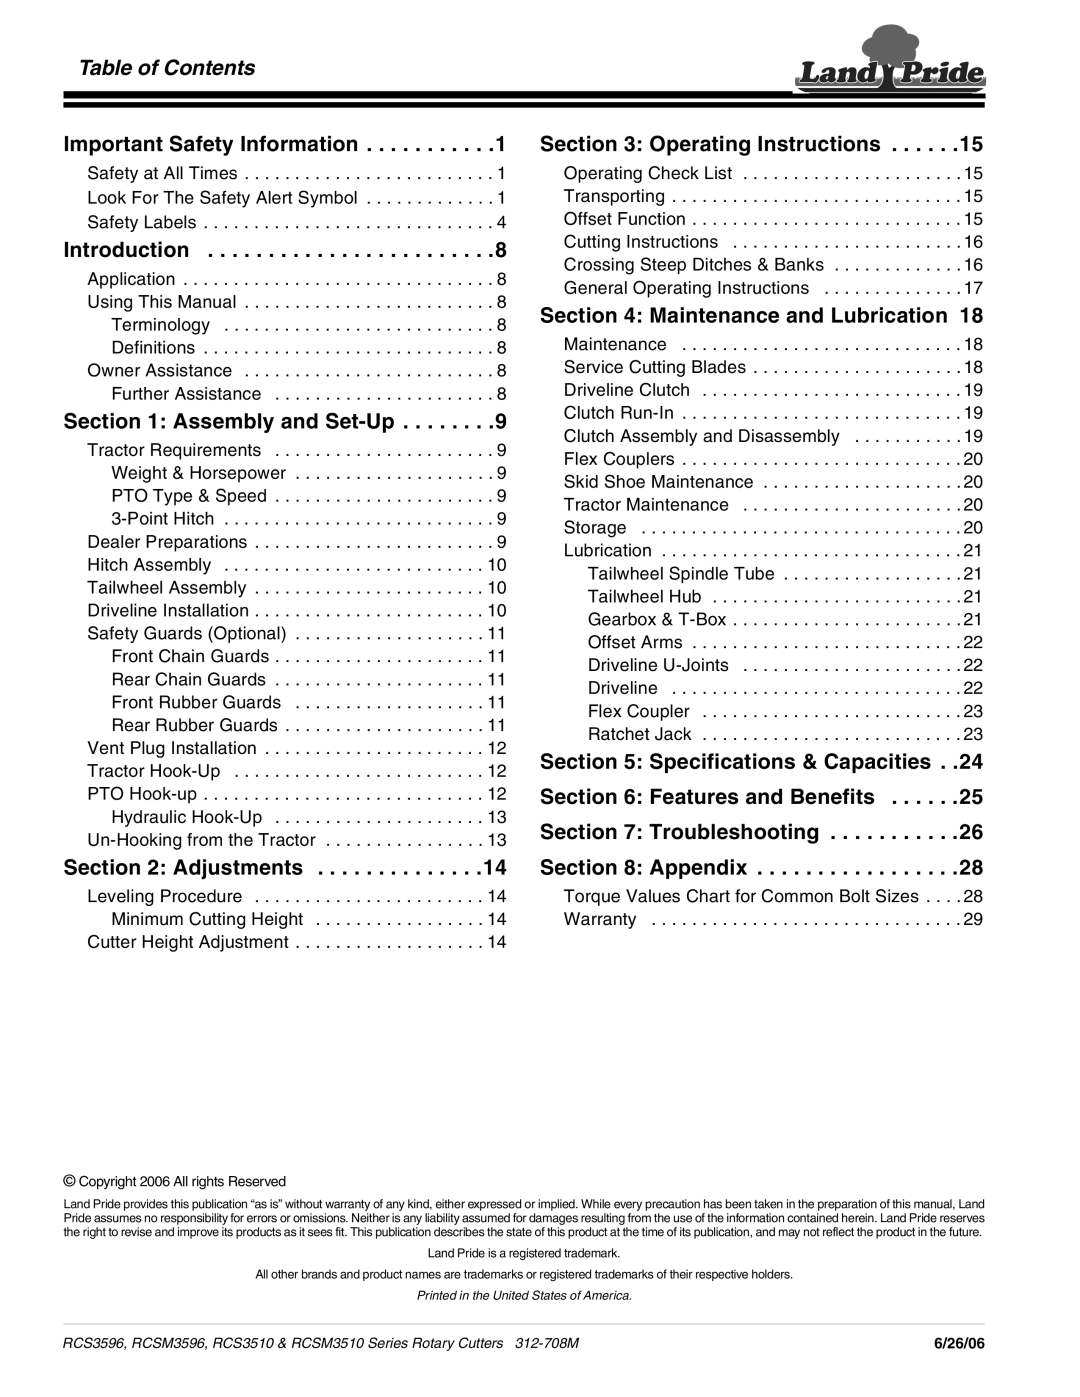 Land Pride RCSM3596 Table of Contents, Important Safety Information, Assembly and Set-Up, Adjustments, Troubleshooting 